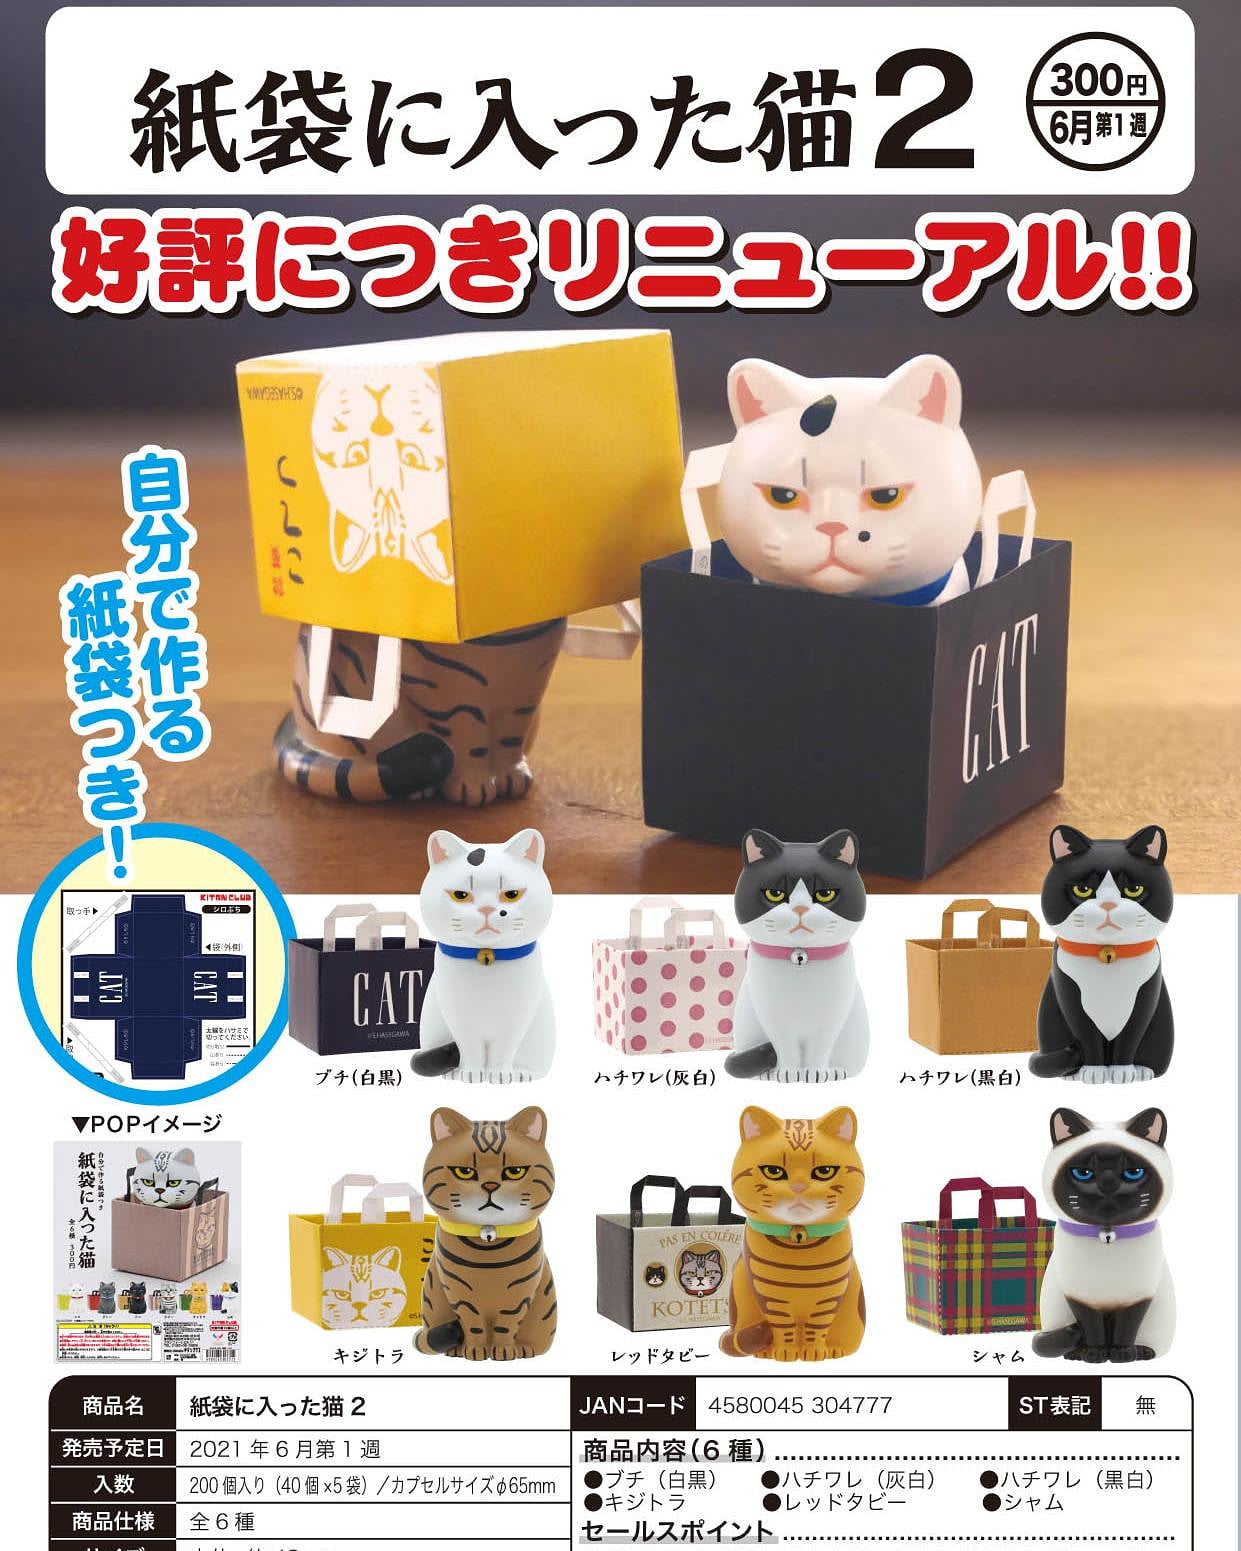 Kitan Club Cats in Paper bags Capsule Gashapon Toy Complete Figures set of 6